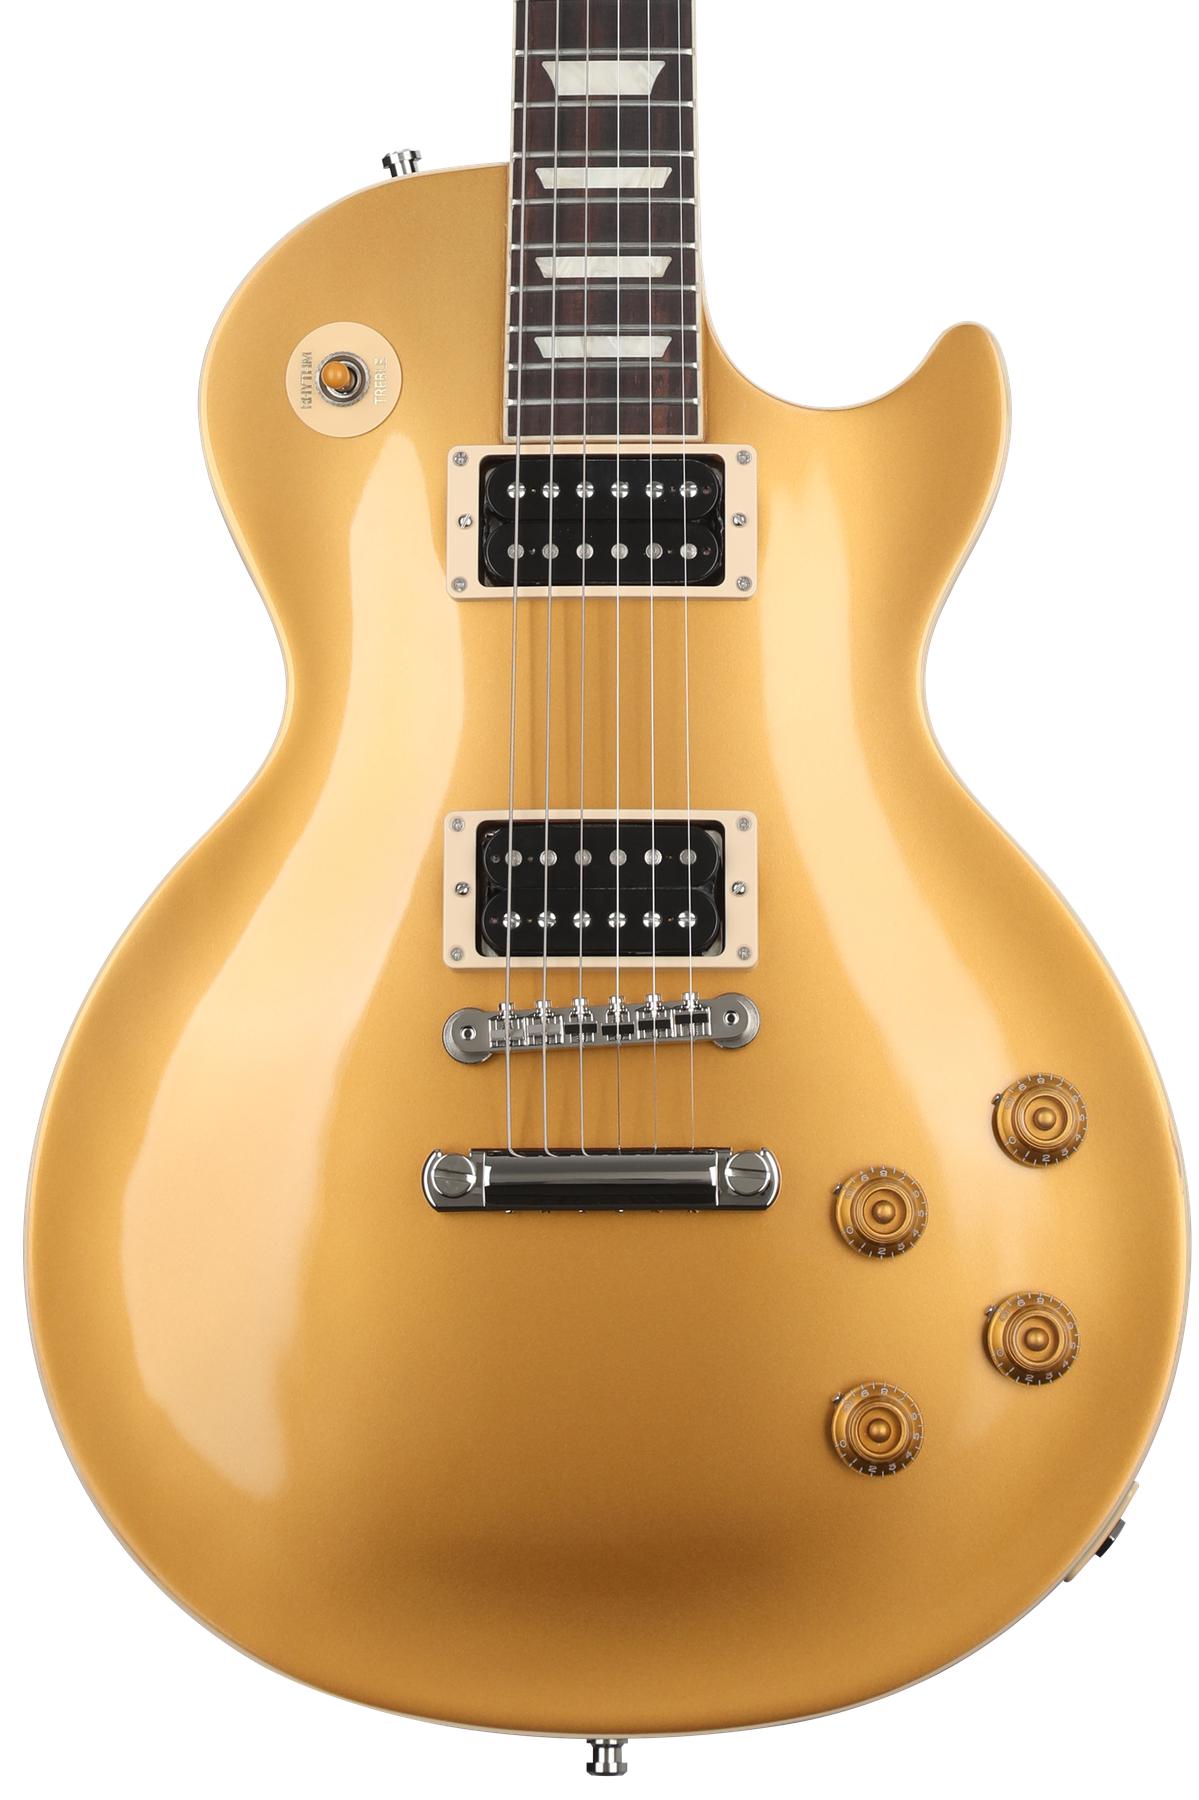 Take A Peek At The New Gibson Slash “victoria” Les Paul Standard Goldtop The Latest In The 